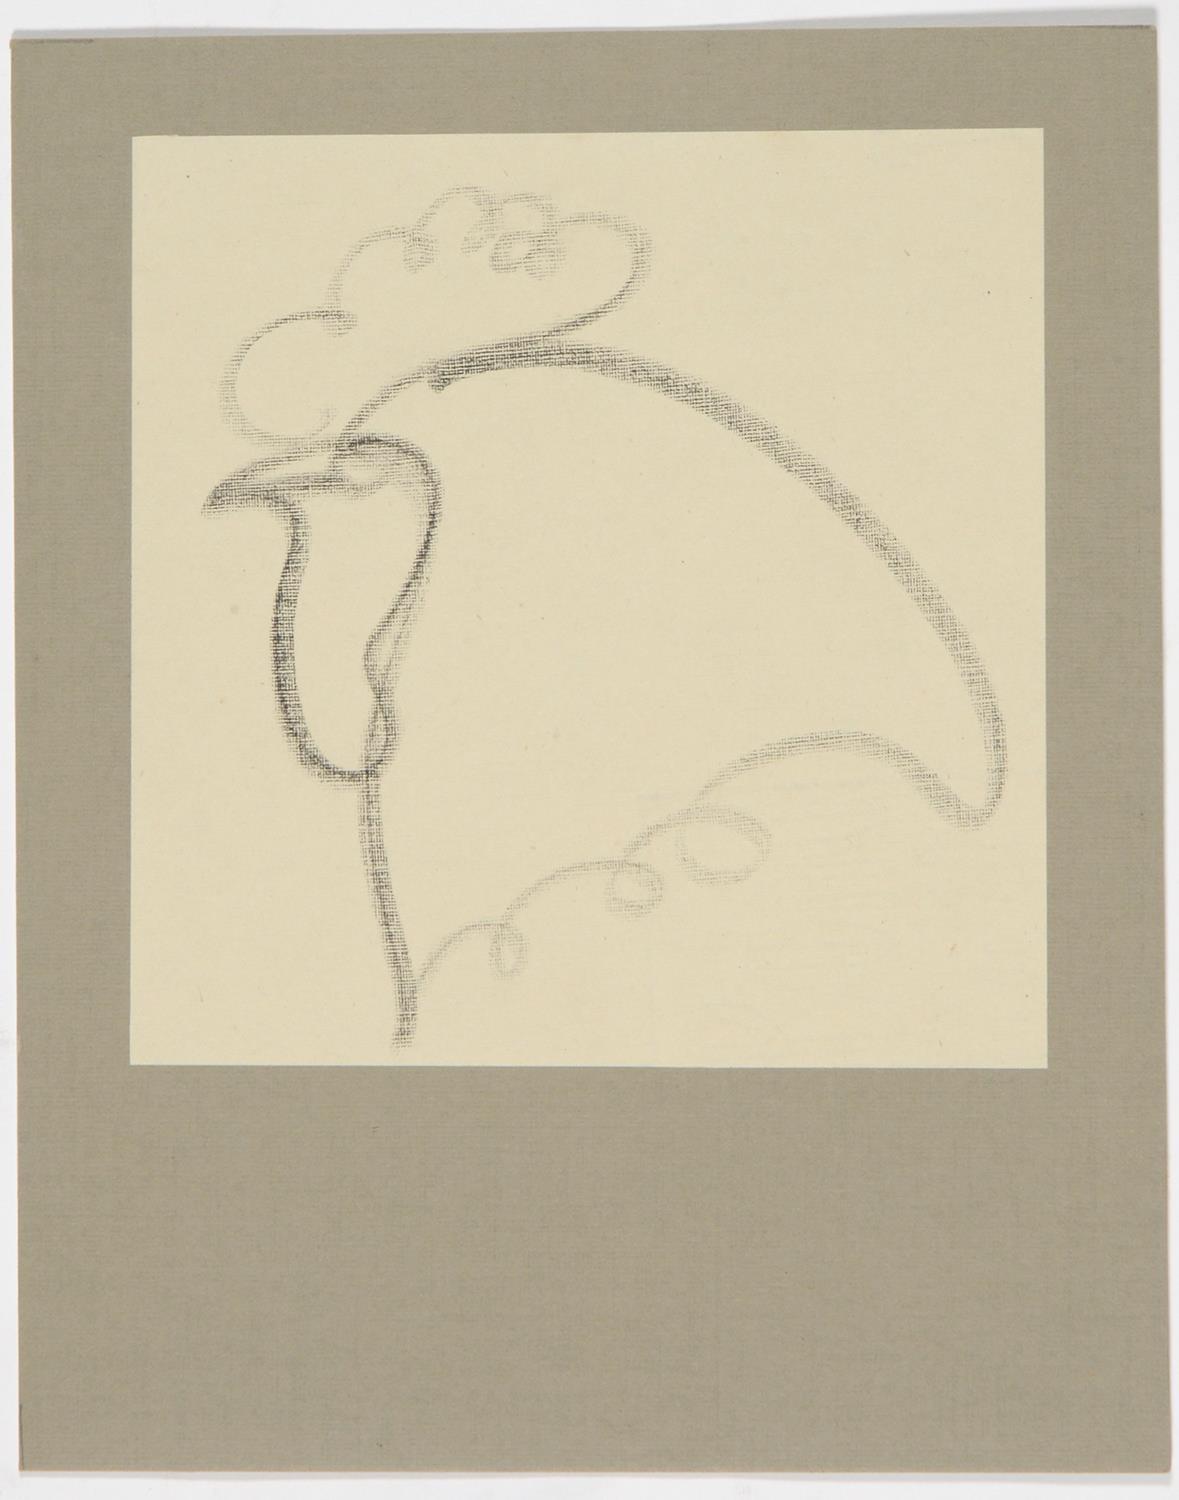 NORMAN DUDLEY SHORT (1882-1951) - A COLLECTION OF SHORT'S ORIGINAL ONE-LINE DRAWINGS, INCLUDING - Bild 4 aus 9